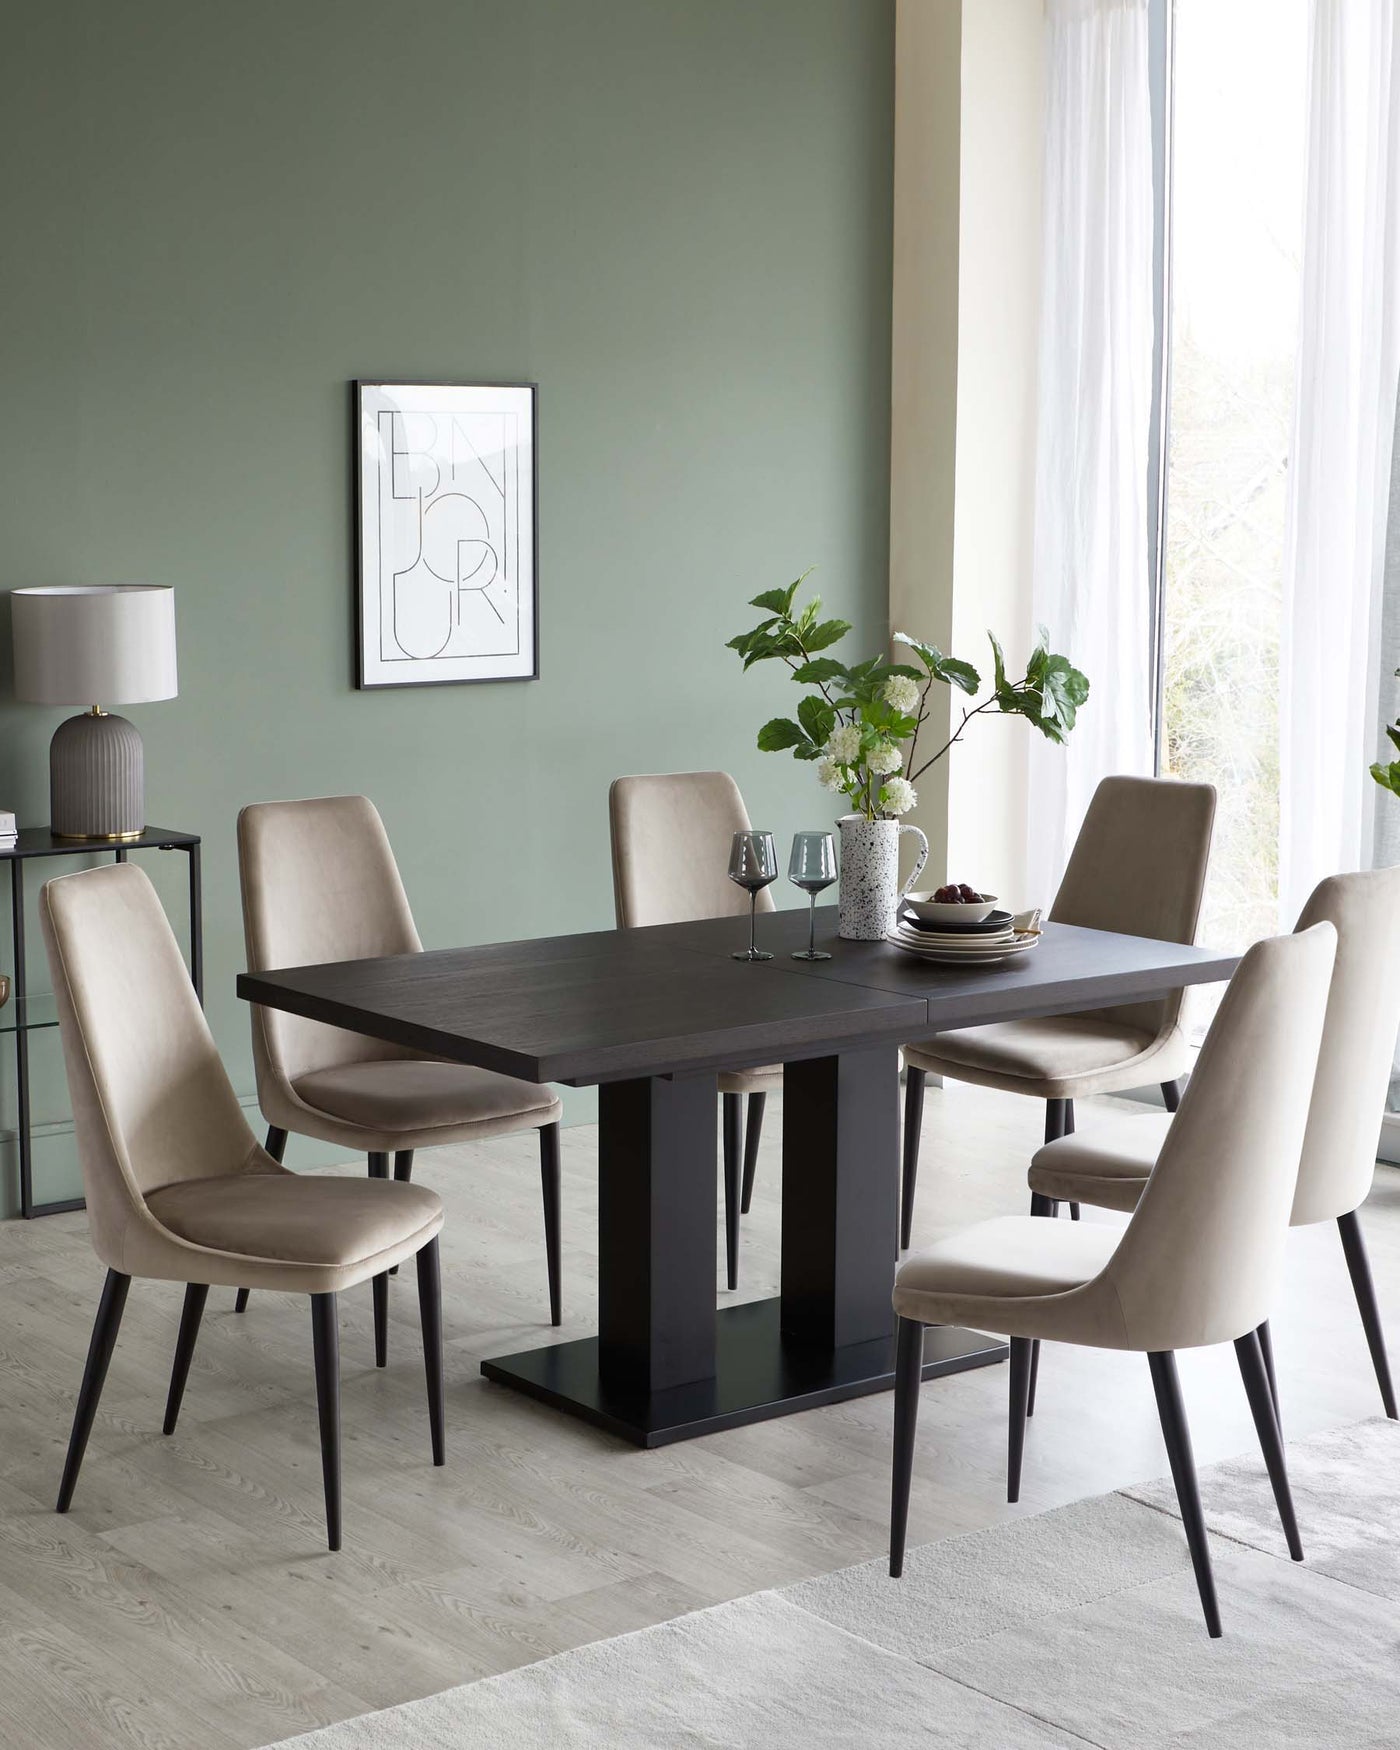 Elegant dining room featuring a modern rectangular dark wood table with a sleek, black base, surrounded by six taupe upholstered chairs with slim black legs. To the left, a matching dark wood sideboard with glass doors hosts decorative items and a grey lamp with a round shade.